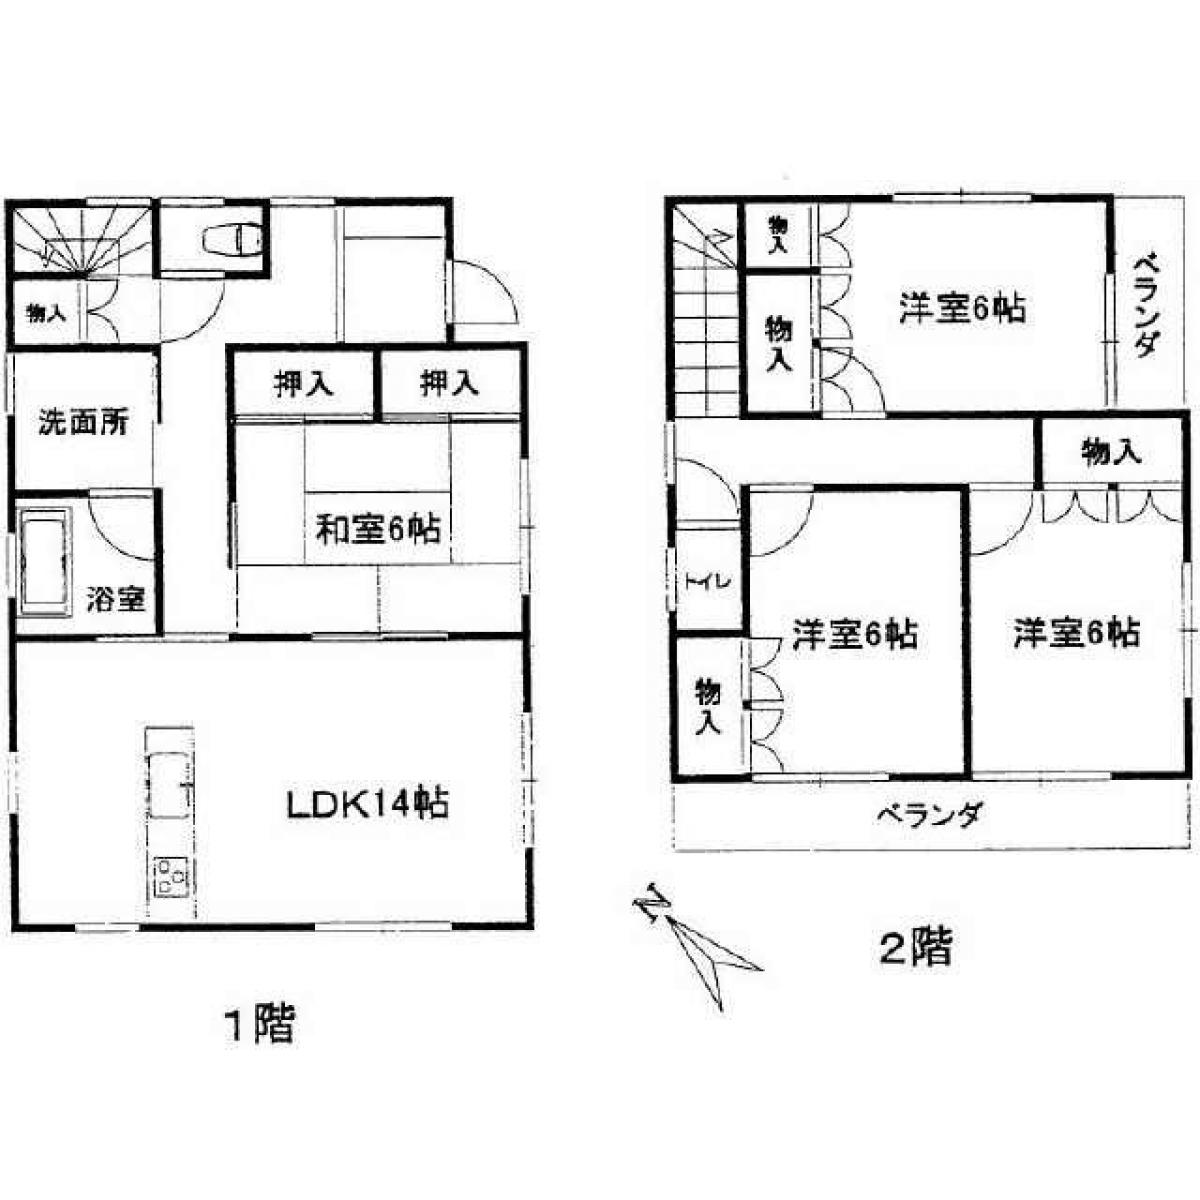 Picture of Home For Sale in Chiba Shi Wakaba Ku, Chiba, Japan